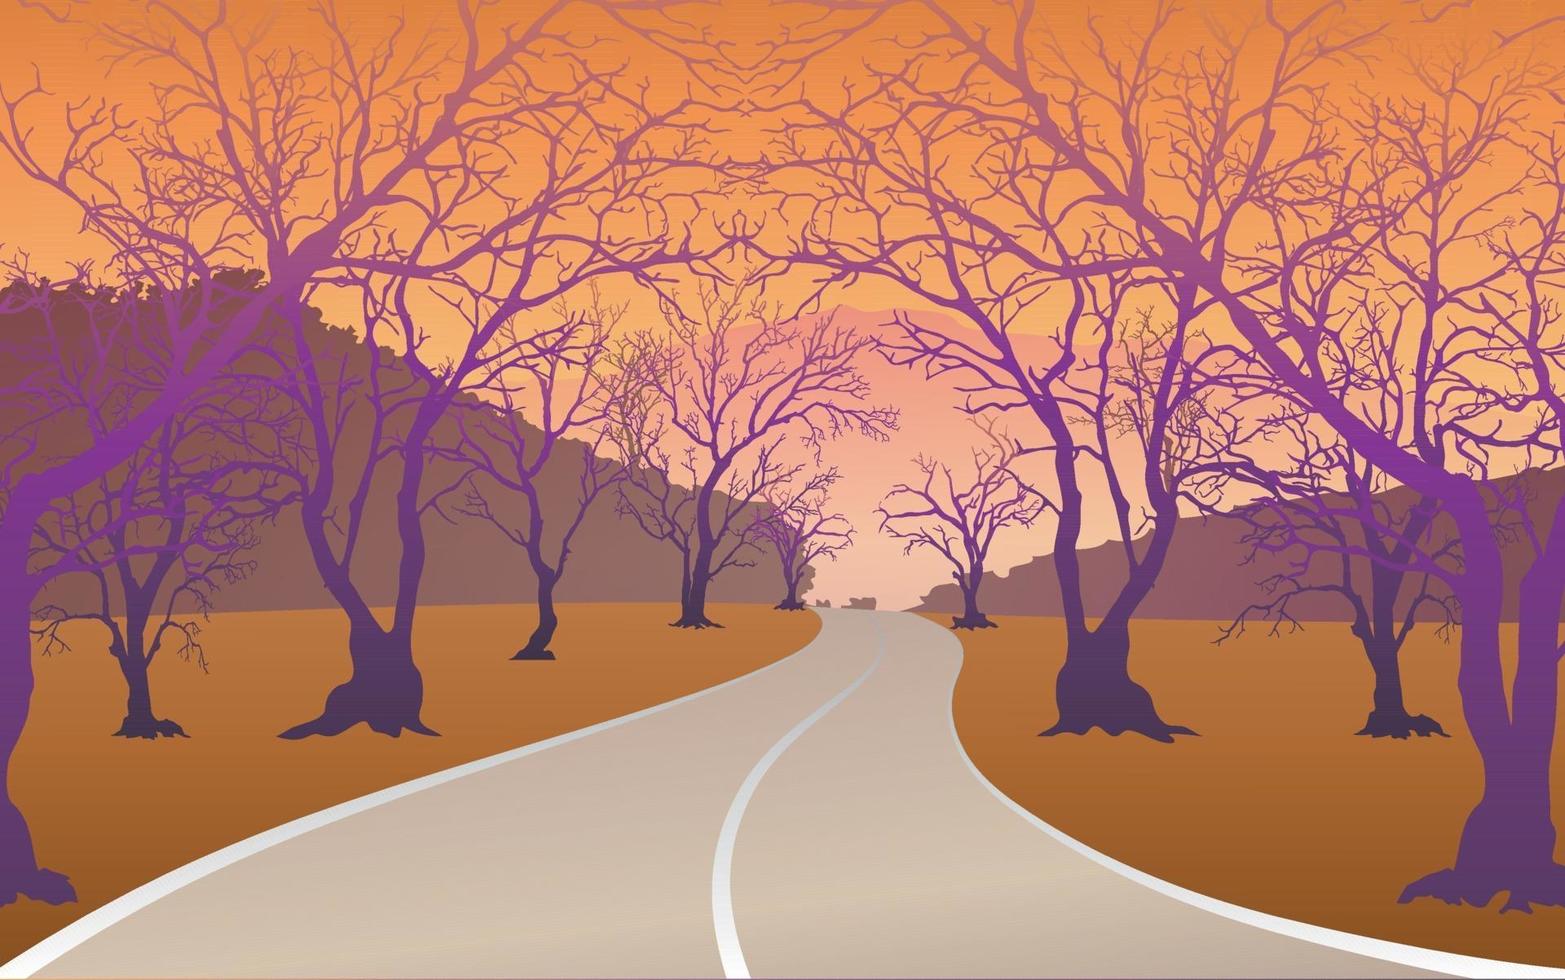 The road that stretches through the mountains vector